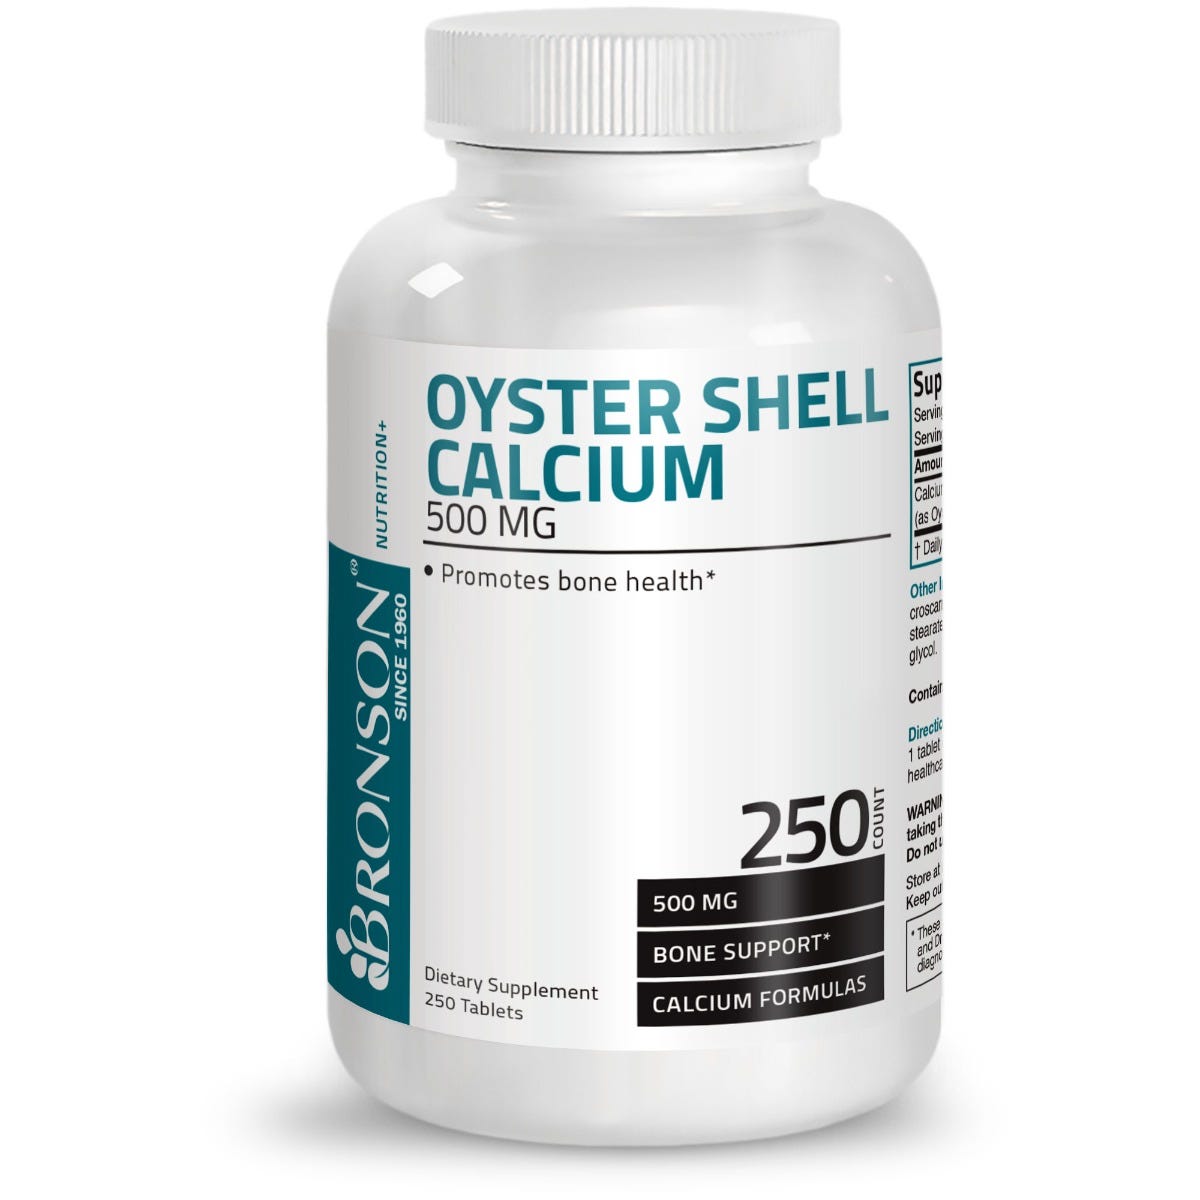 Oyster Shell Calcium - 500 mg - 250 Tablets view 2 of 7